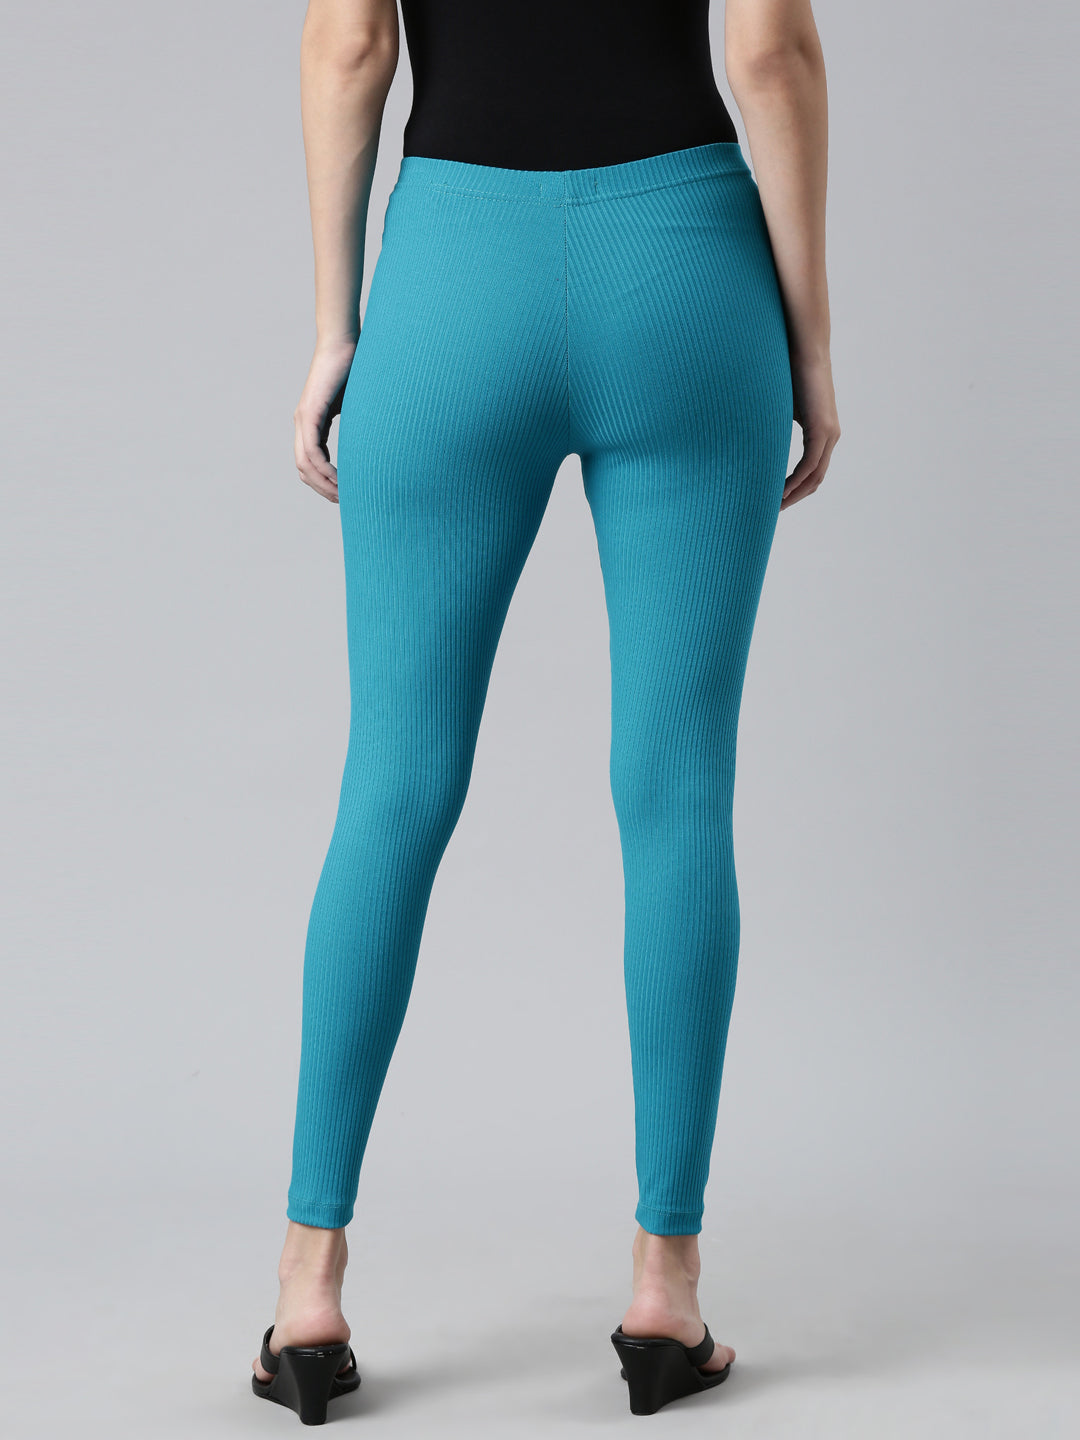 Go Colors AQUA Leggings in Chennai at best price by Go Colors (Head Office)  - Justdial